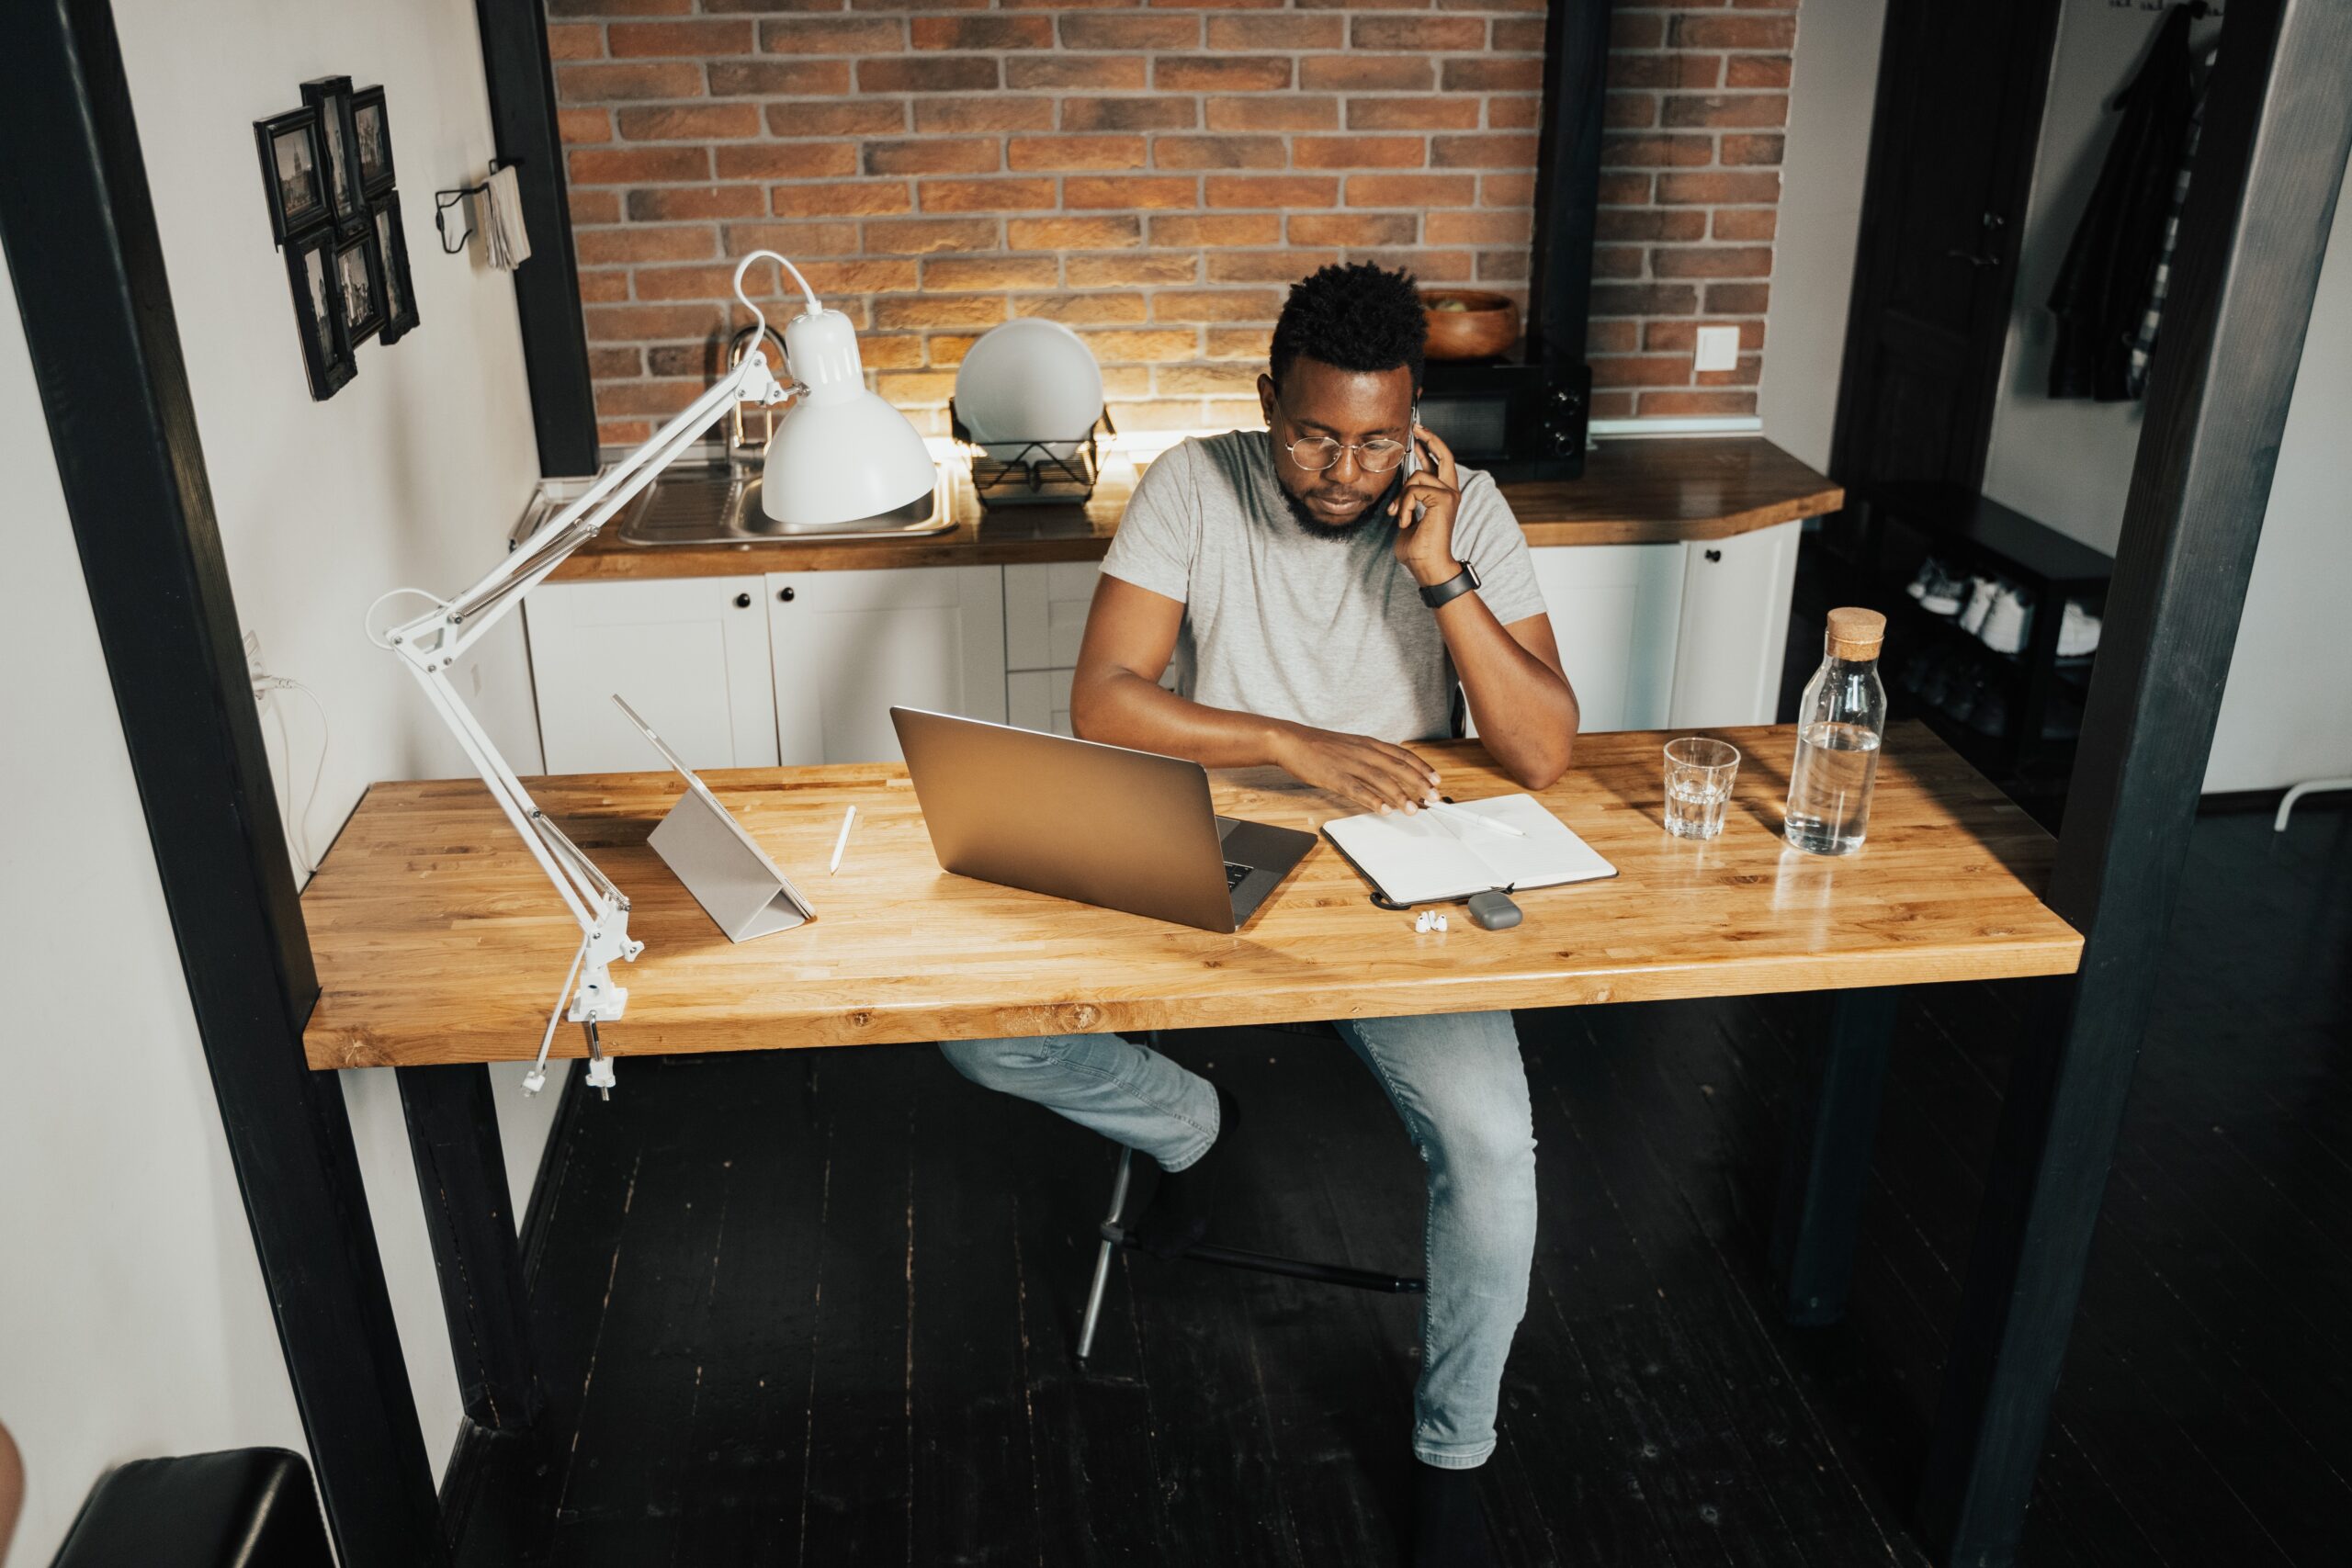 8 Big Benefits of Remote Working to Consider Now